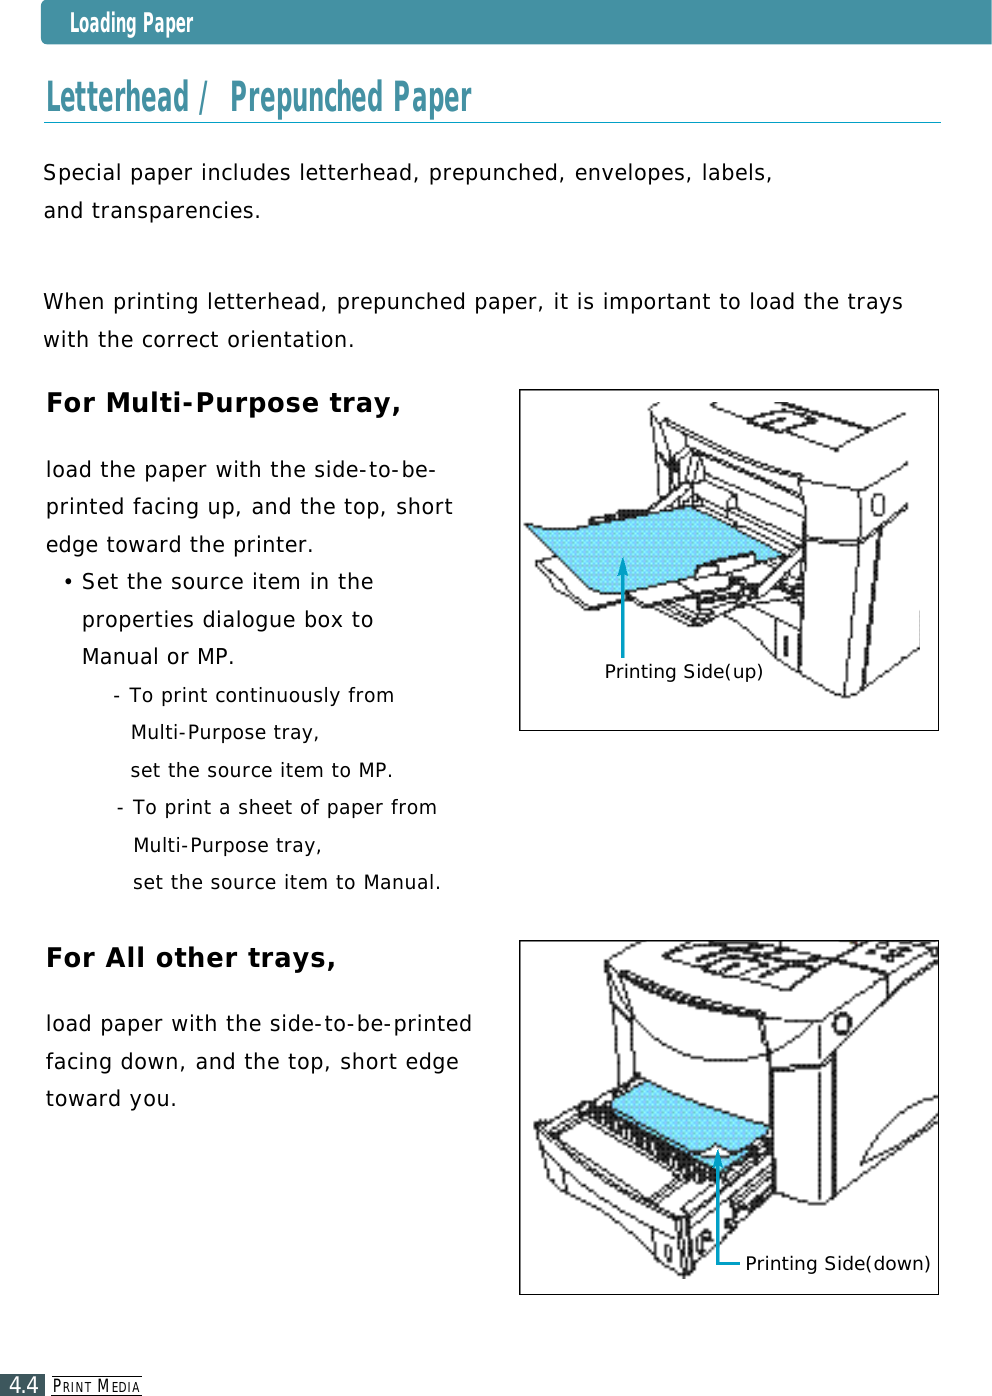 PR I N T ME D I A4.4For Multi-Purpose tray, load the paper with the side-to-be-printed facing up, and the top, shortedge toward the printer.• Set the source item in the properties dialogue box to Manual or MP.- To print continuously from Multi-Purpose tray, set the source item to MP.- To print a sheet of paper from Multi-Purpose tray, set the source item to Manual.For All other trays, load paper with the side-to-be-printedfacing down, and the top, short edget o ward yo u .Loading PaperLetterhead / Prepunched PaperPrinting Side(down)Printing Side(up)Special paper includes letterhead, prepunched, envelopes, labels, and tra n s p a r e n c i e s .When printing letterhead, prepunched paper, it is important to load the trays with the correct orientation.